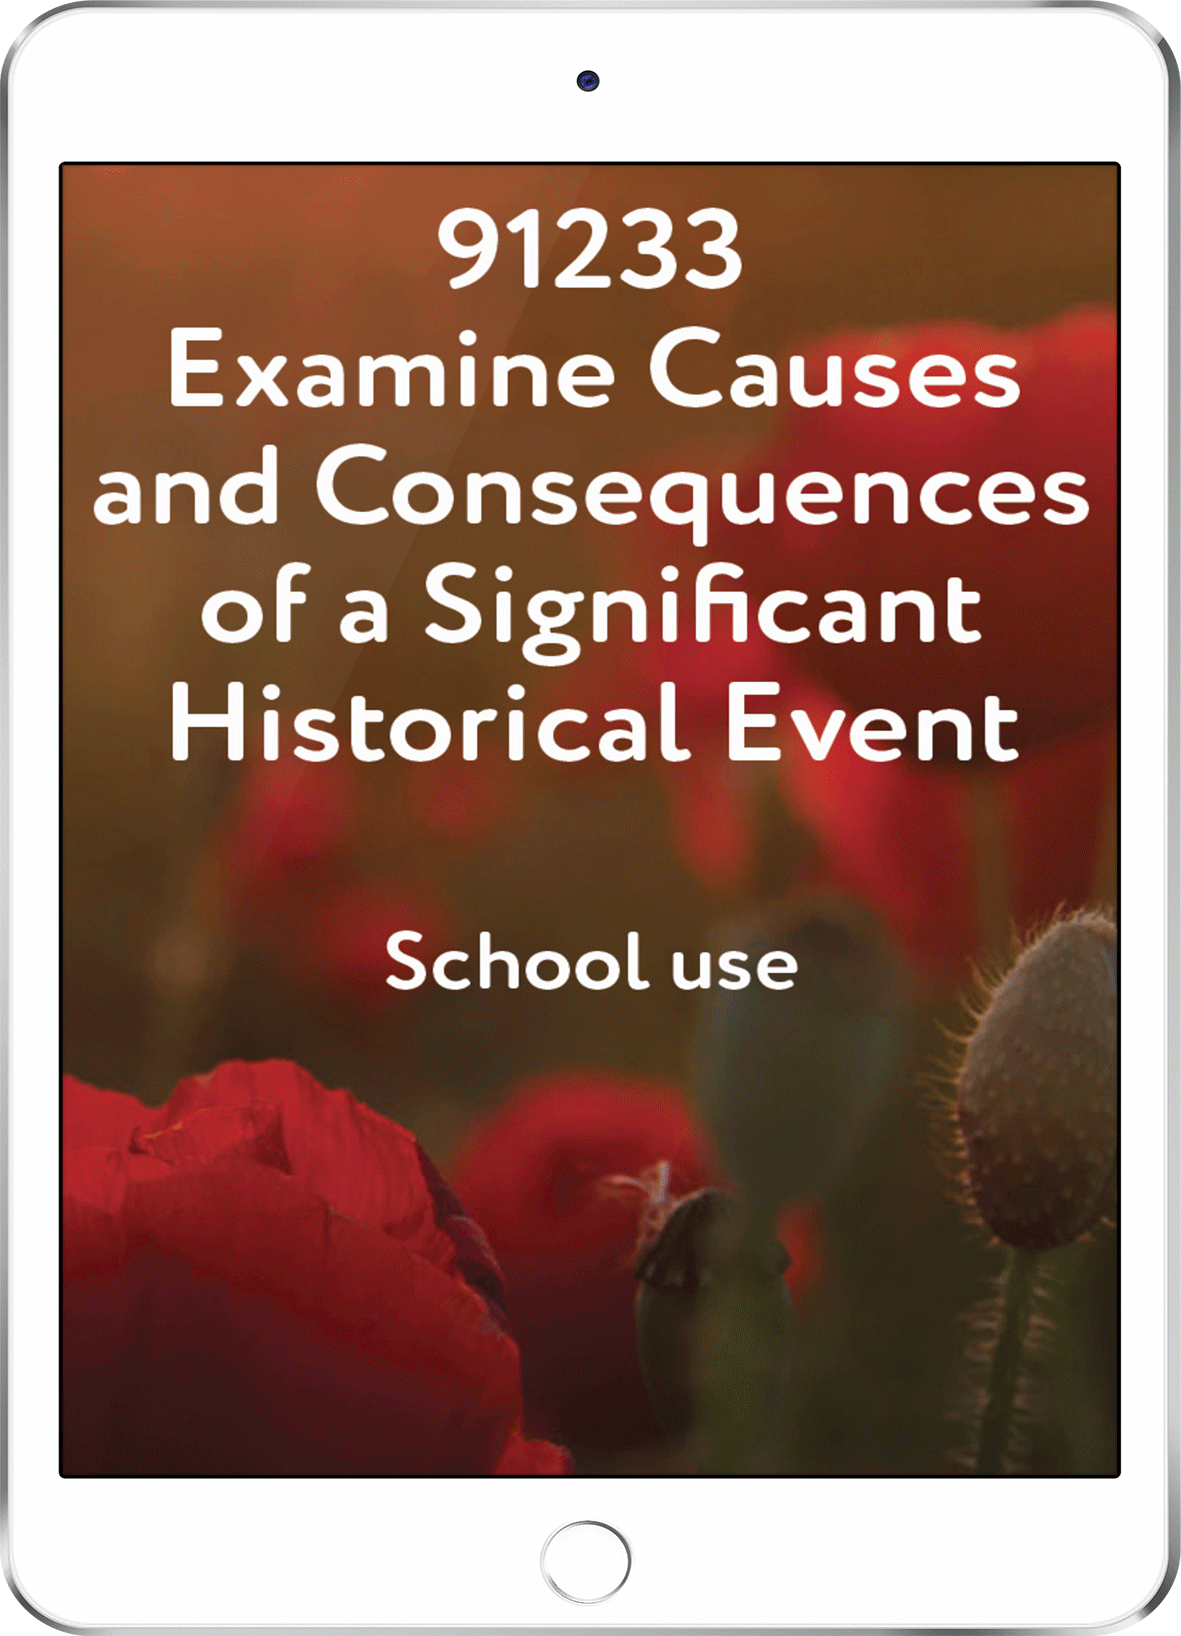 91233 Examine Causes and Consequences of a Significant Historical Event - School Use